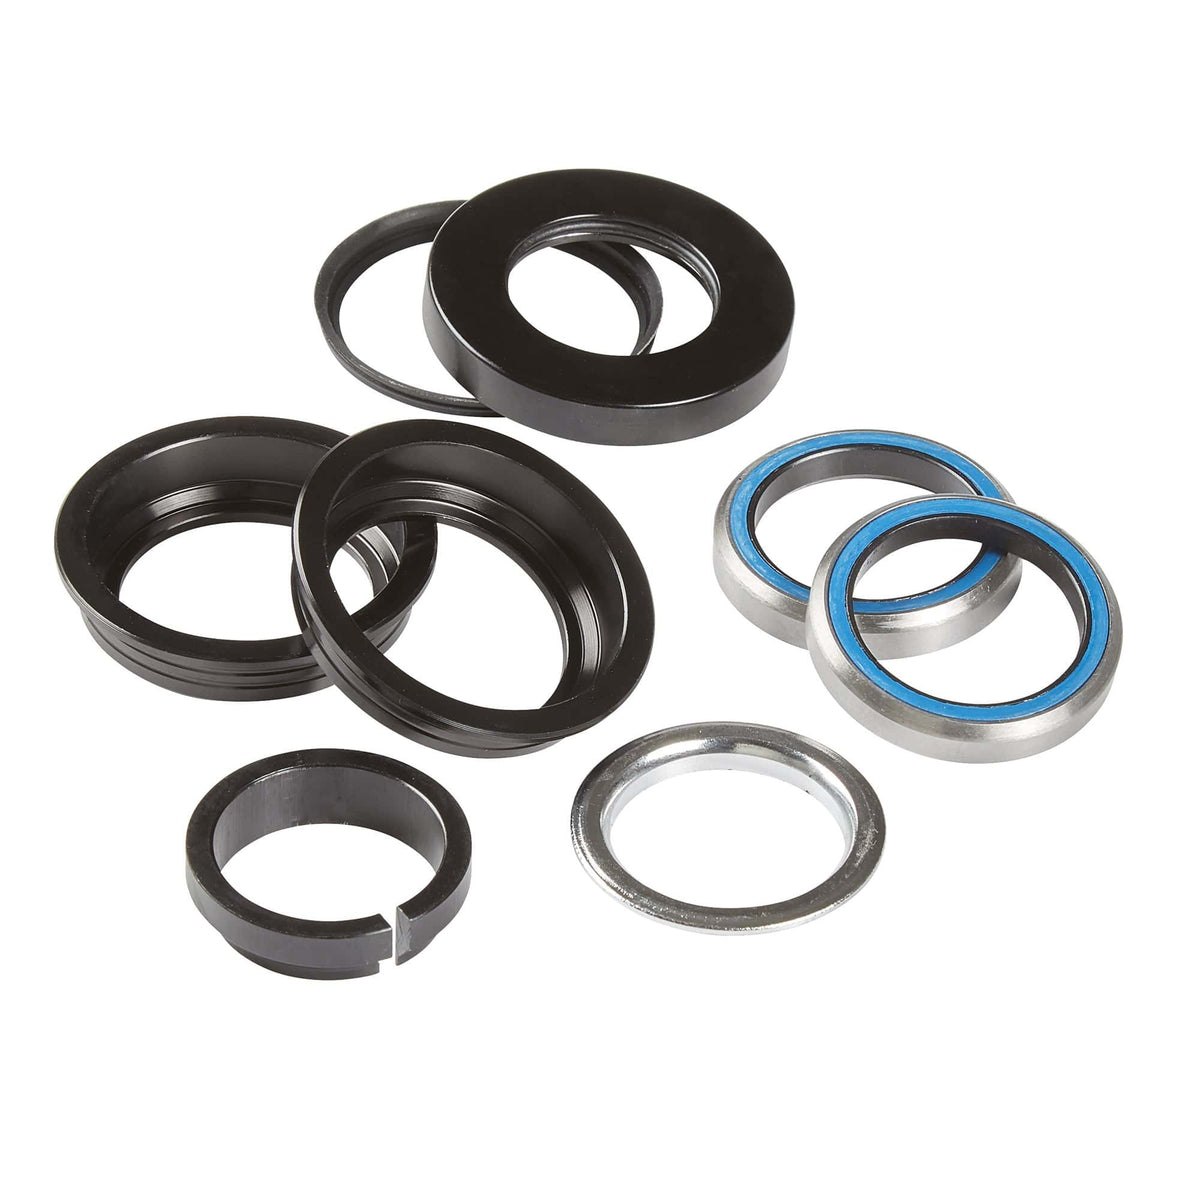 Replacement Bearing Kit for Rev Scooter - Boosted USA